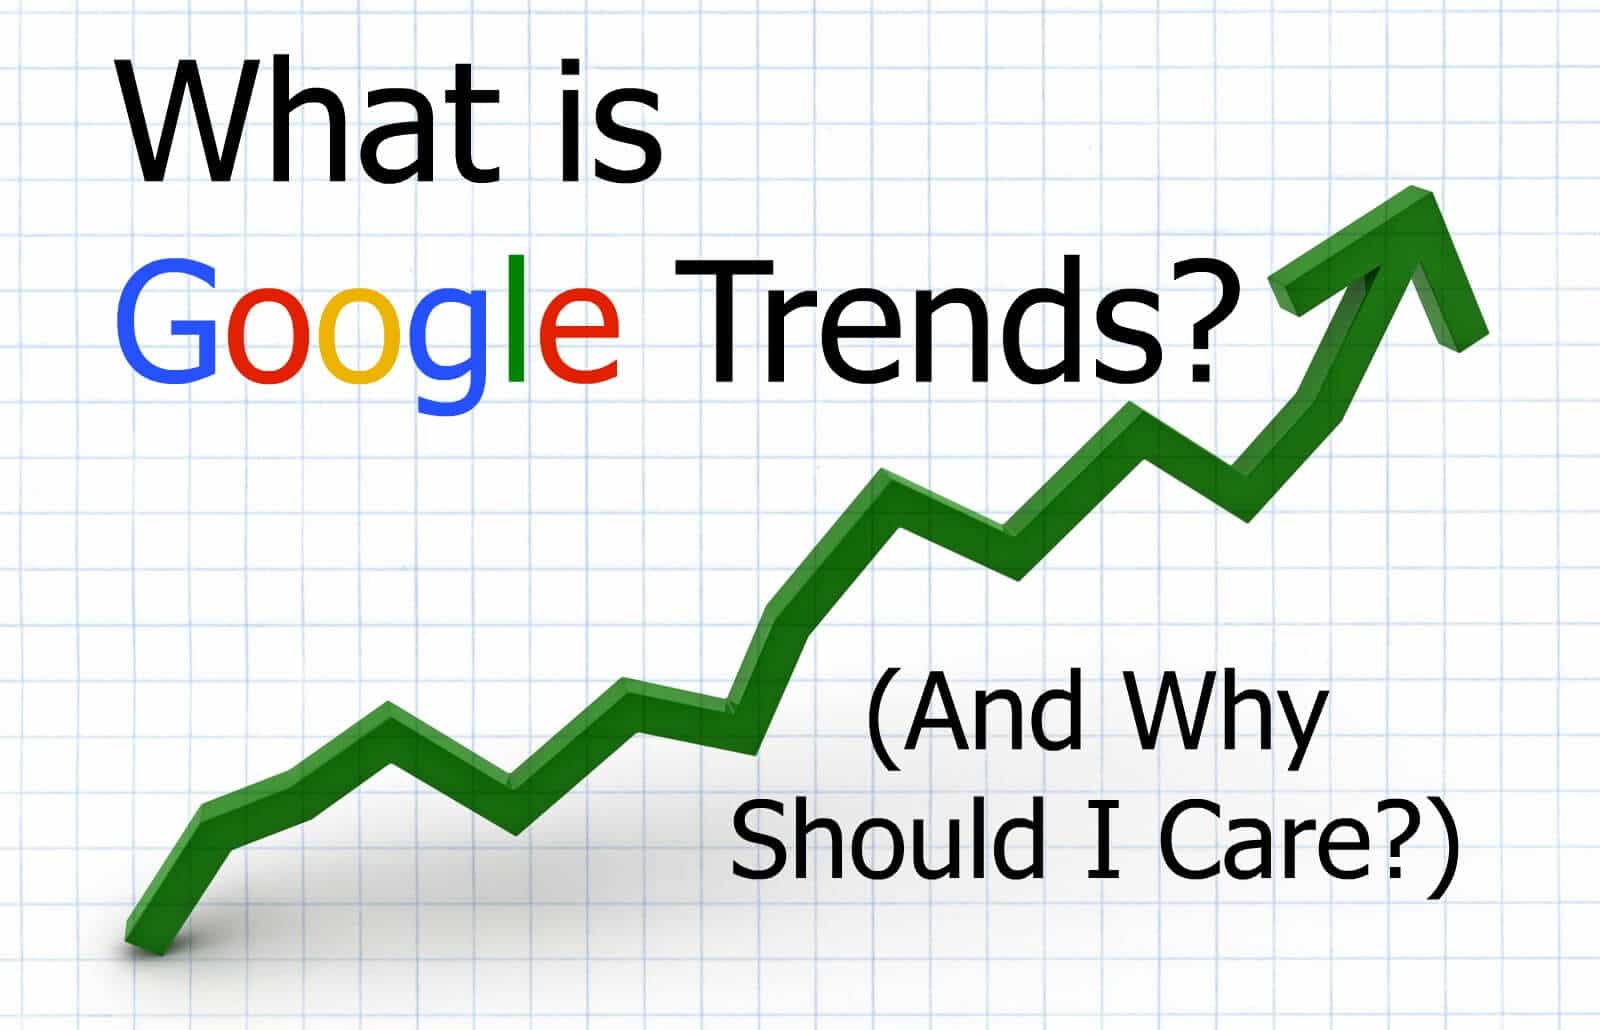 what is google trends and why should i care?